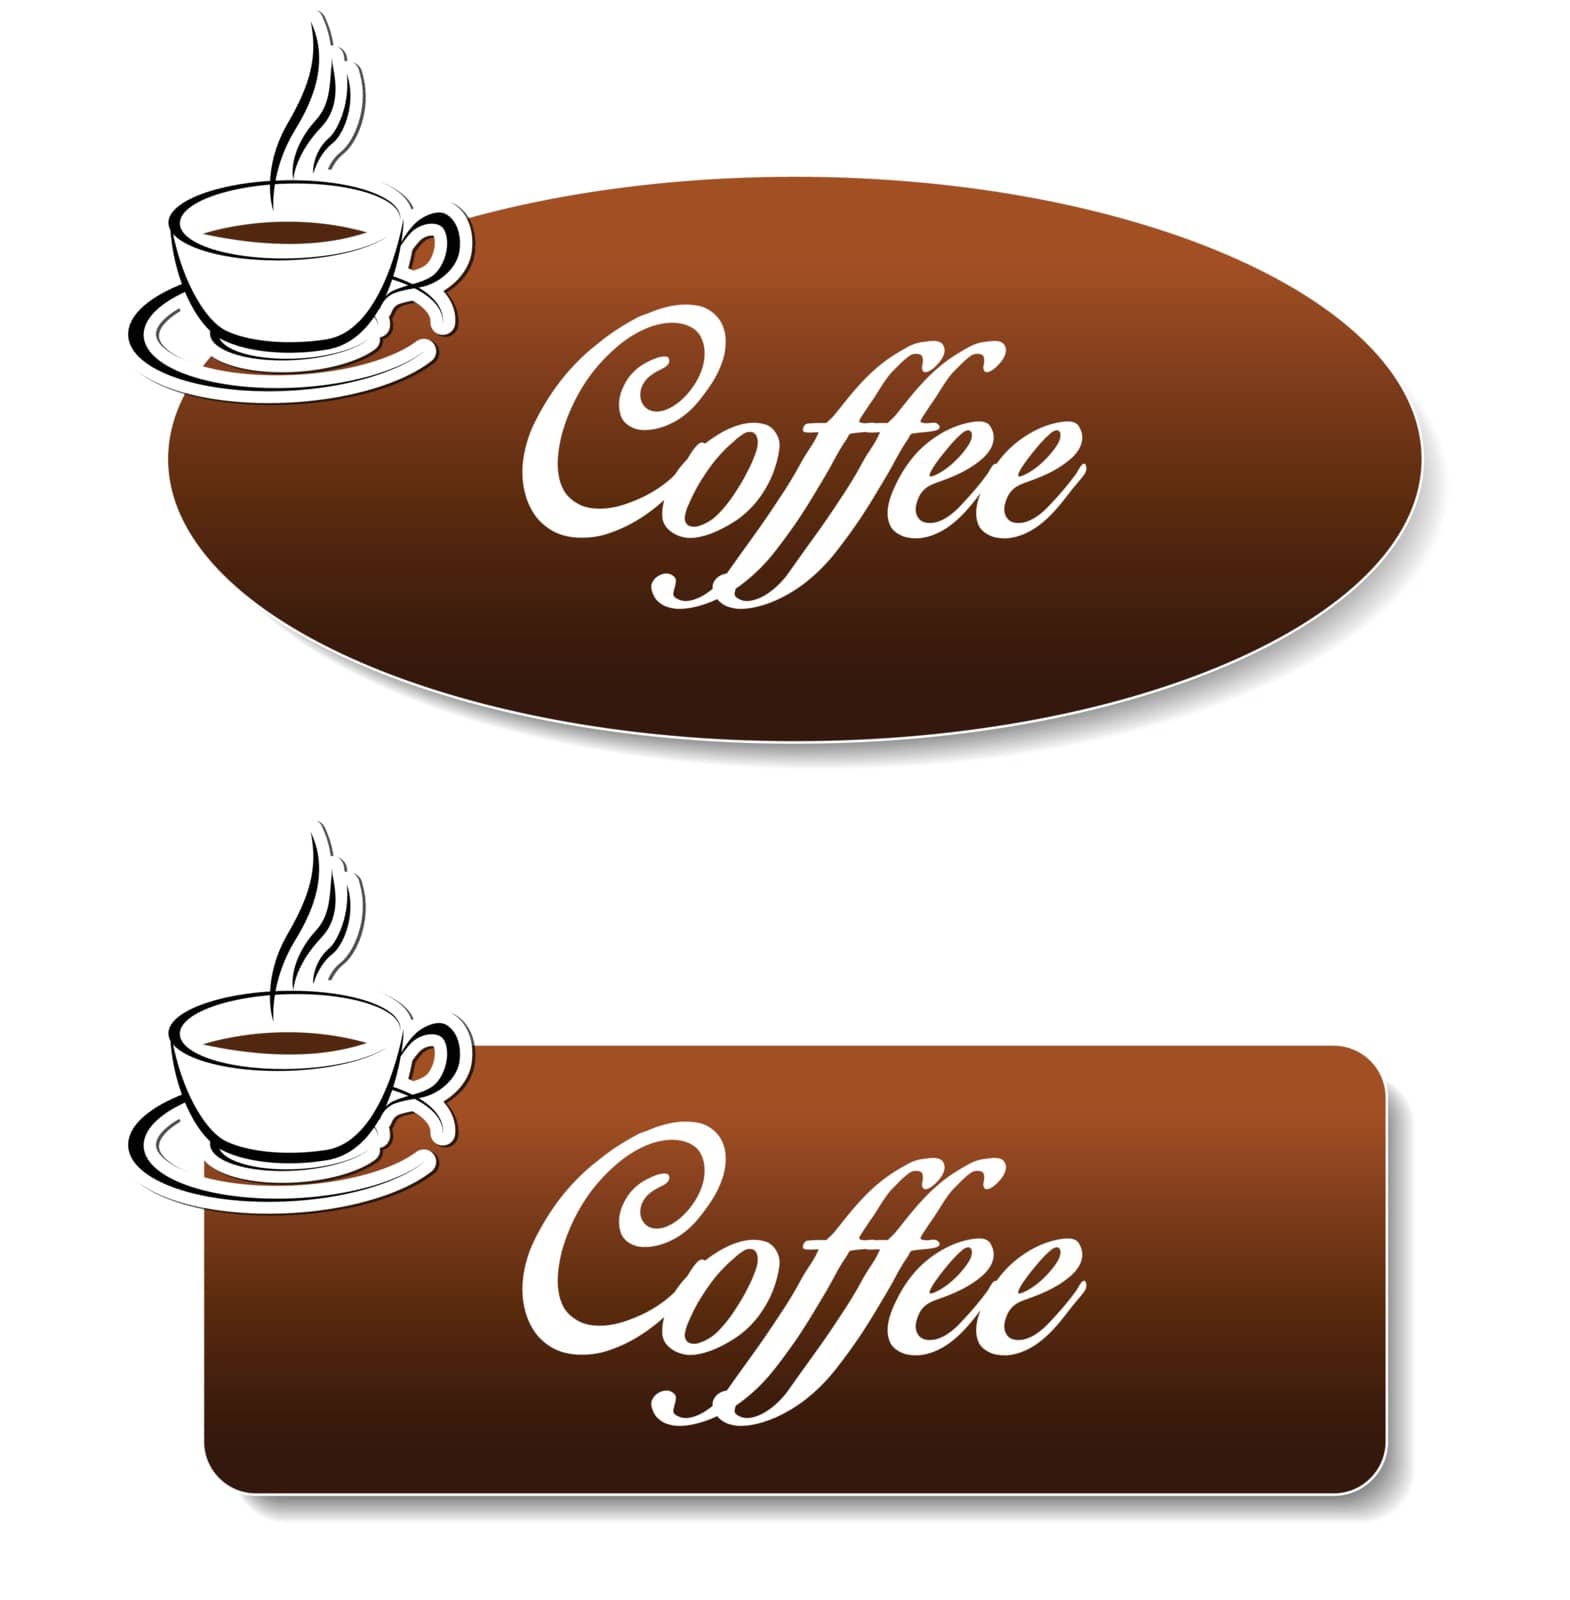 brown coffee banners by nickylarson974